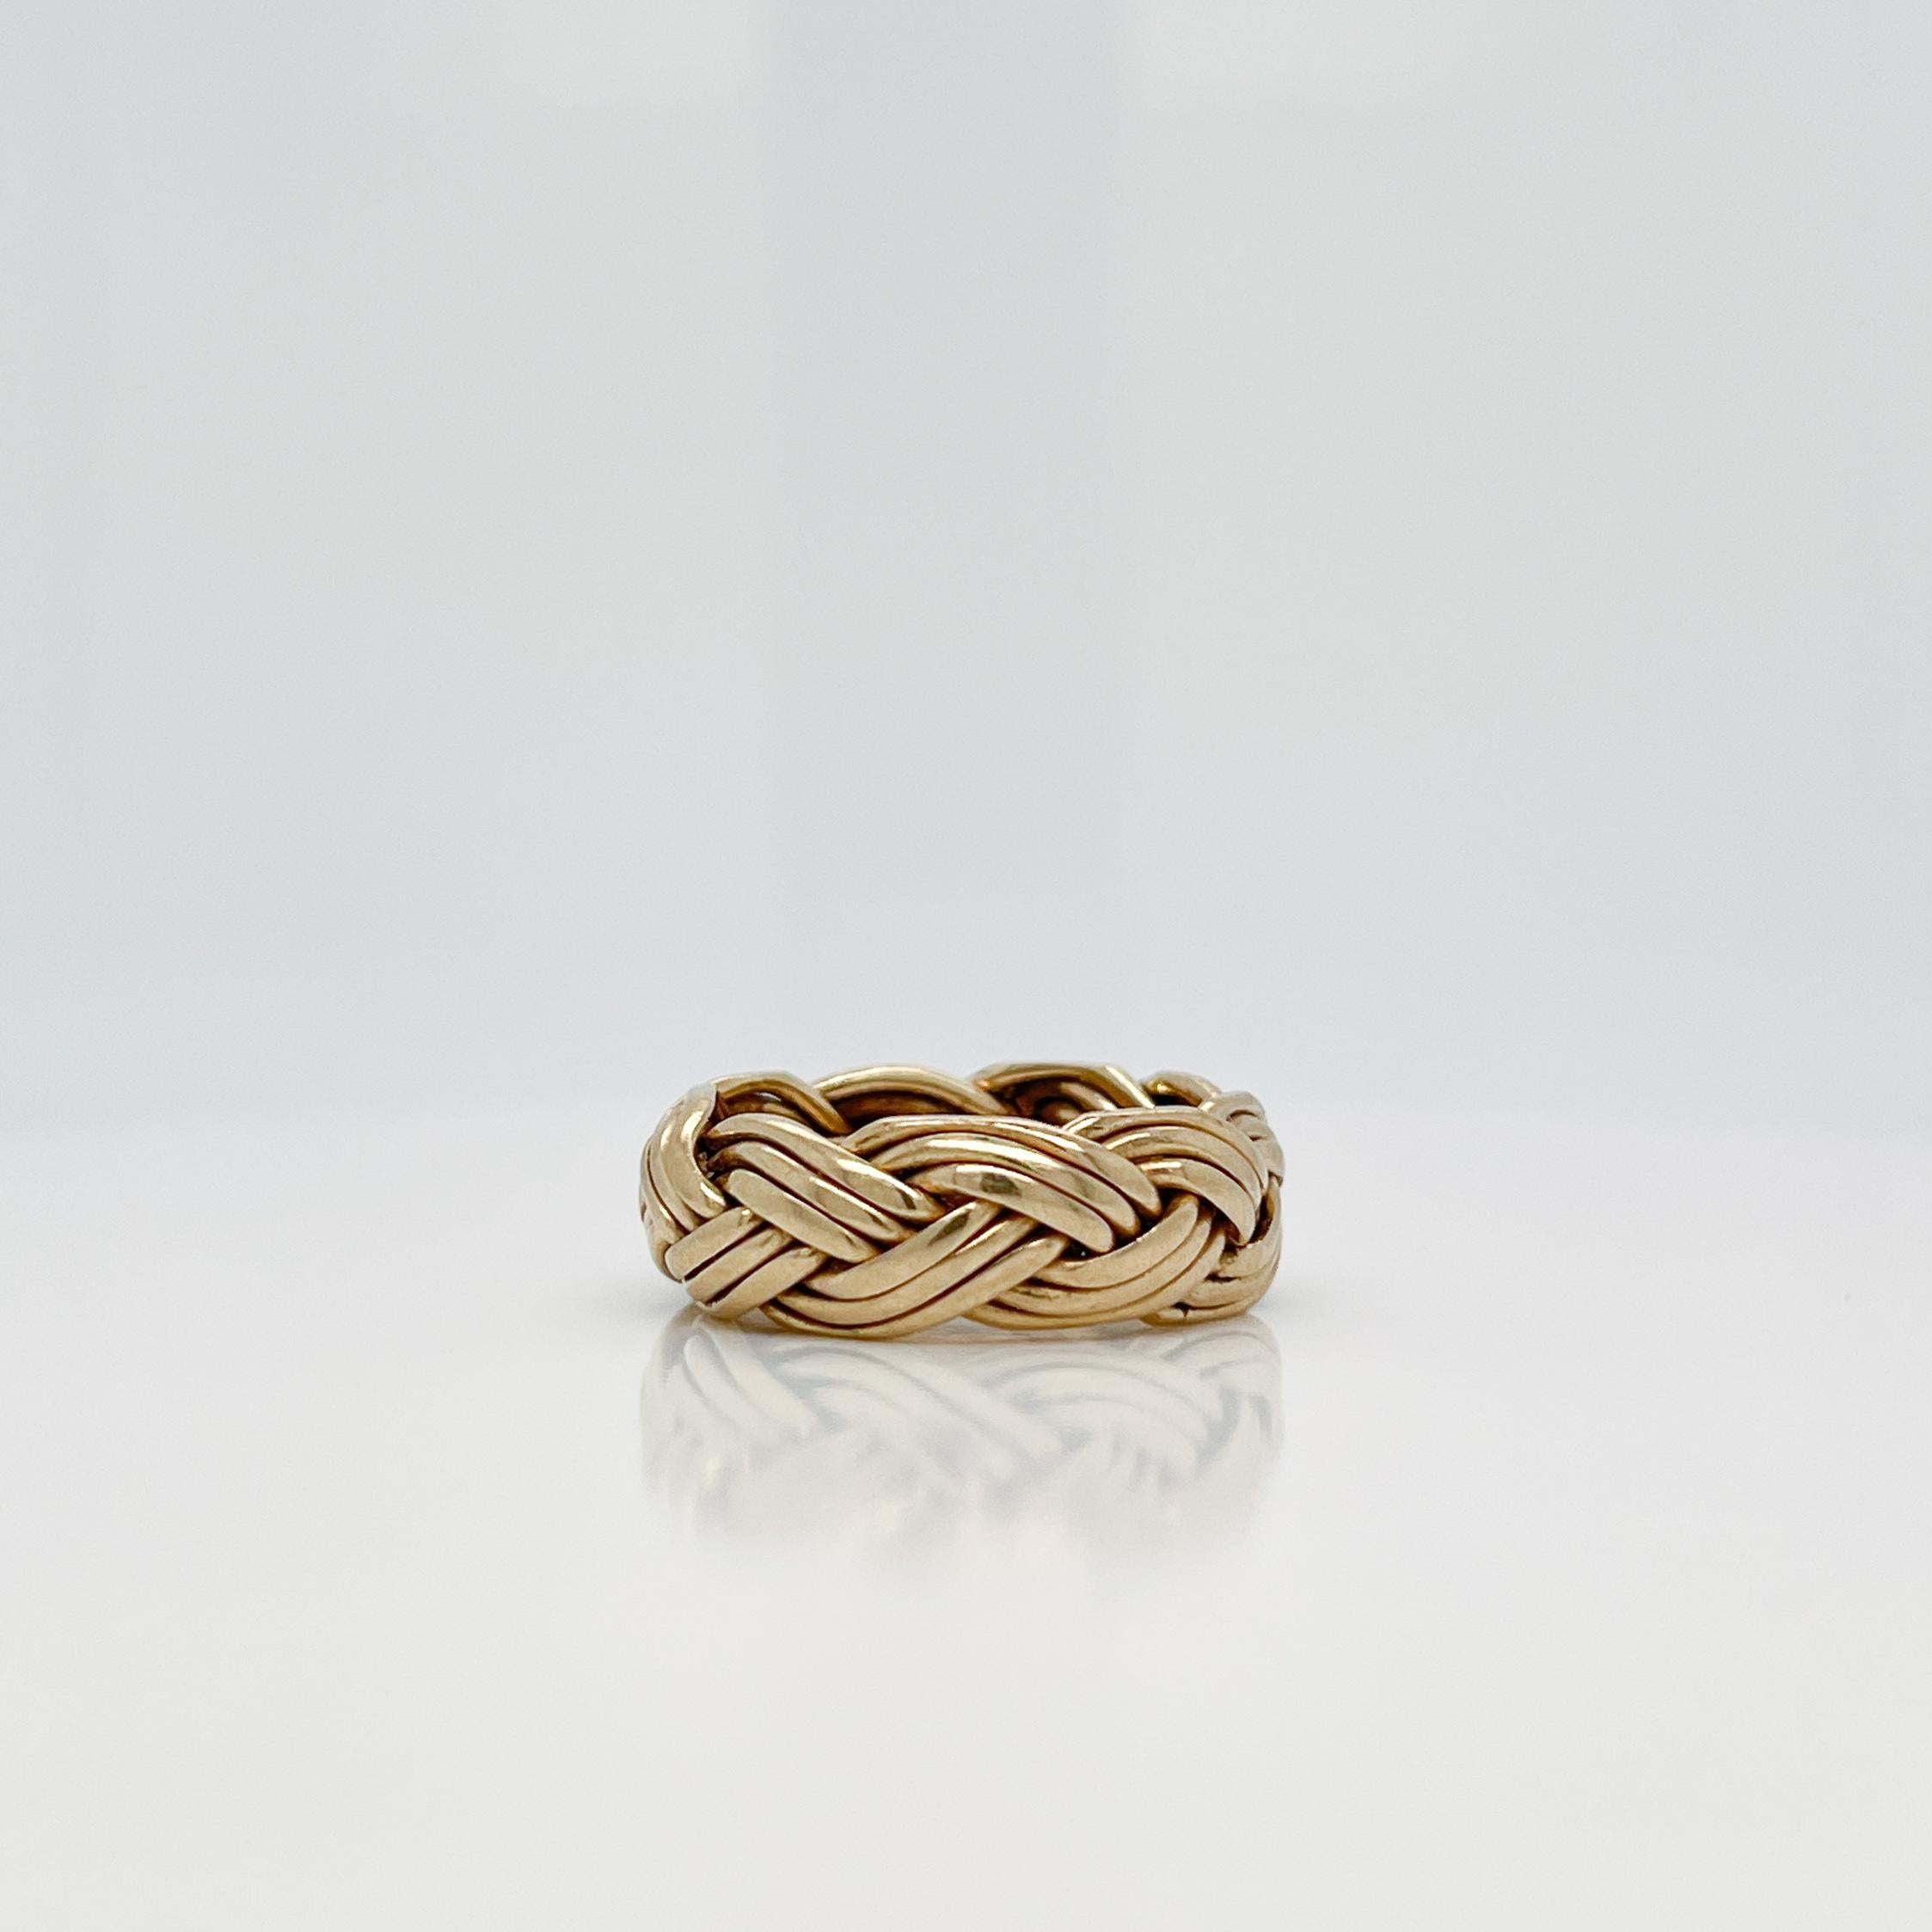 Tiffany & Co. 14 Karat Braided Band Ring In Good Condition For Sale In Philadelphia, PA